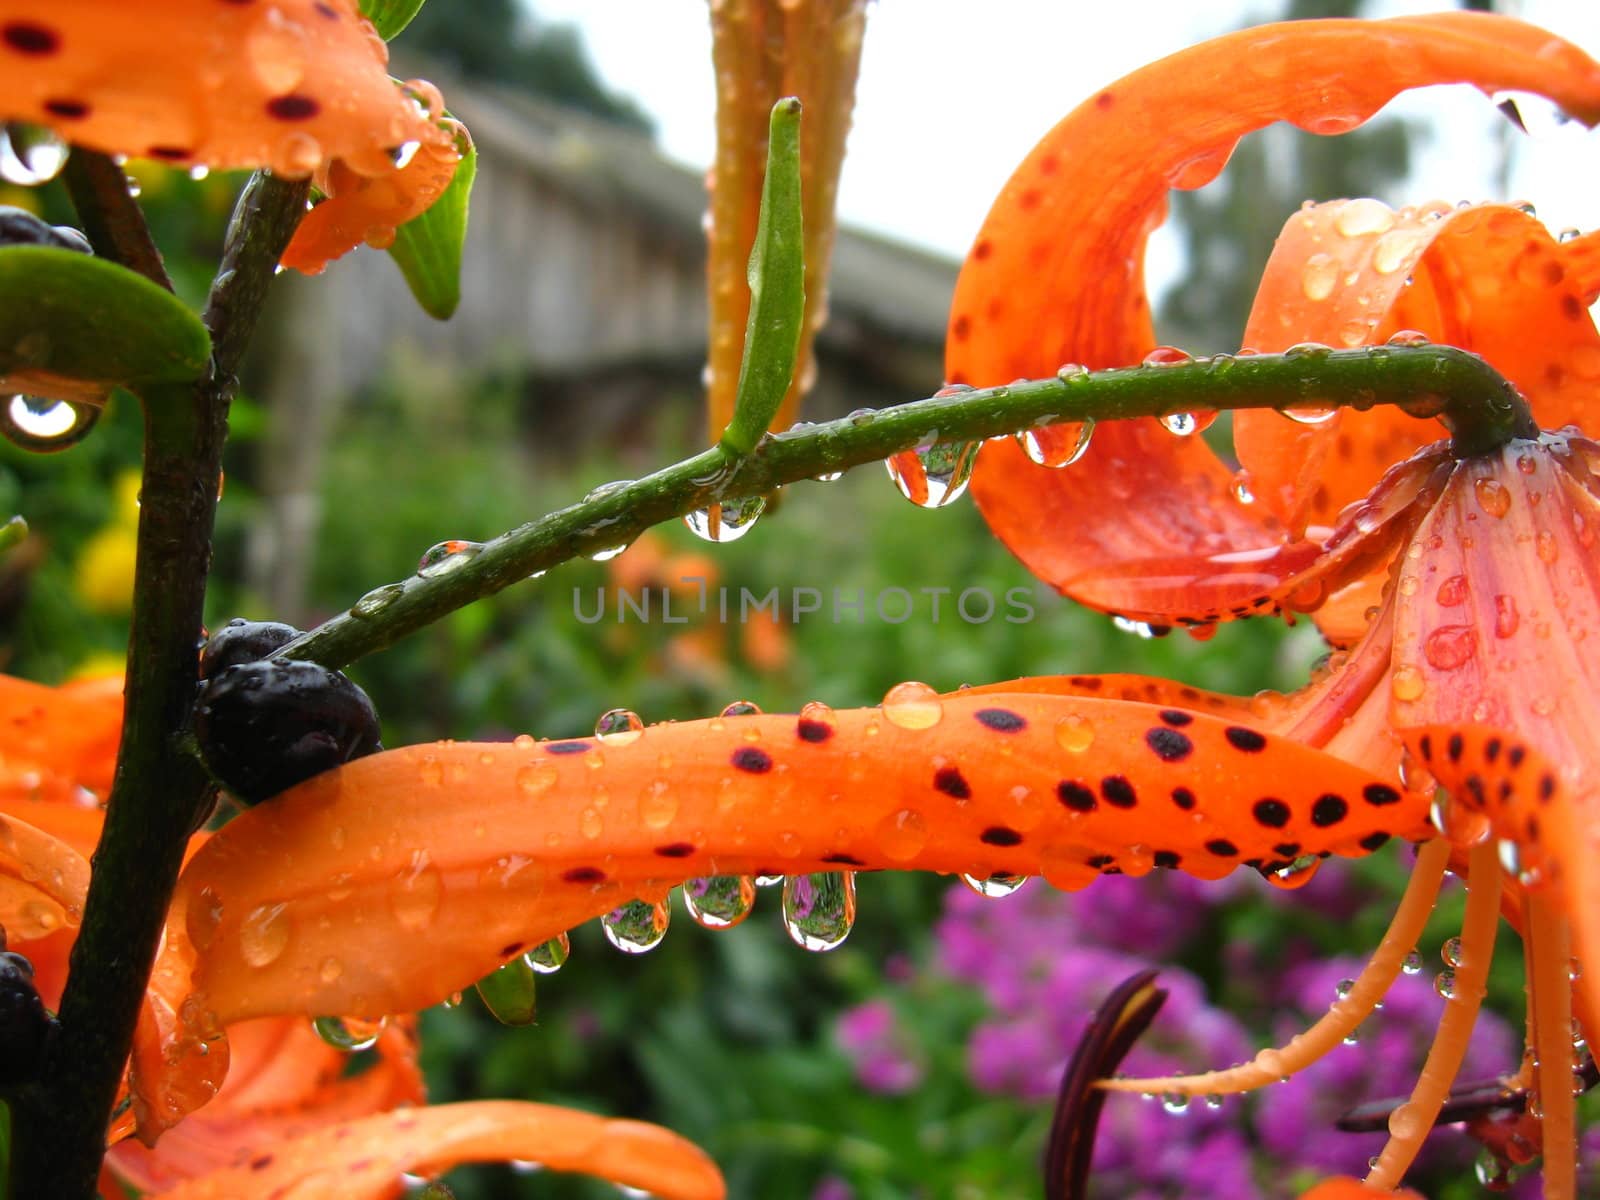 Drops of water on the redheaded lilies after a rain